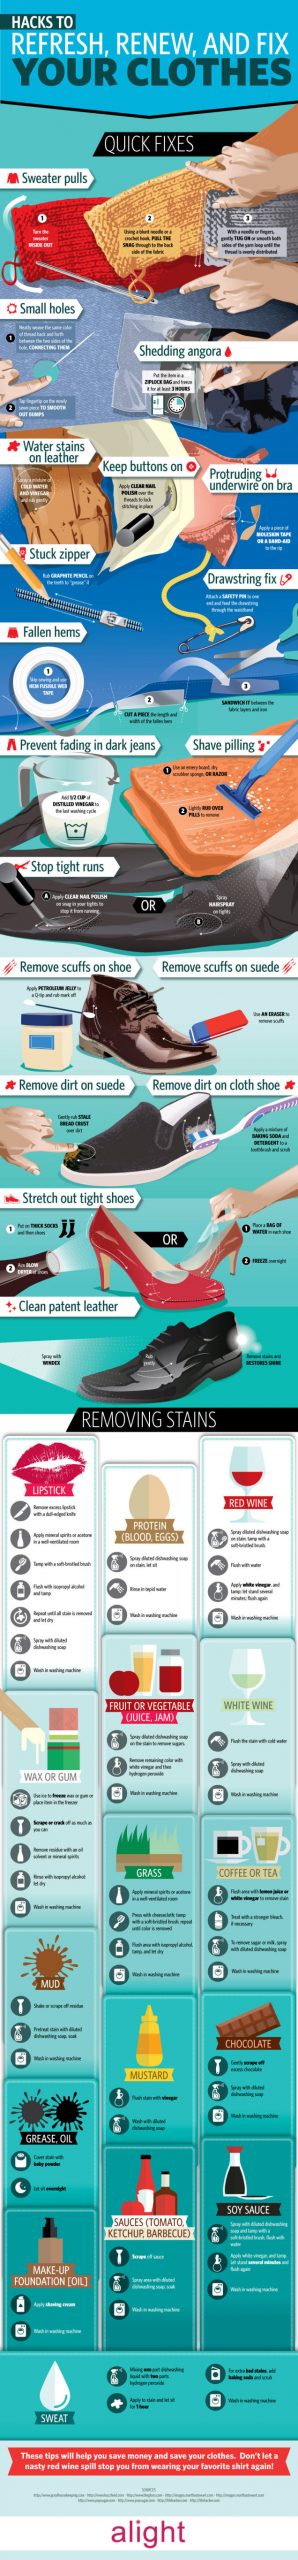 How to Repair Common Clothing Problems (Infographic)